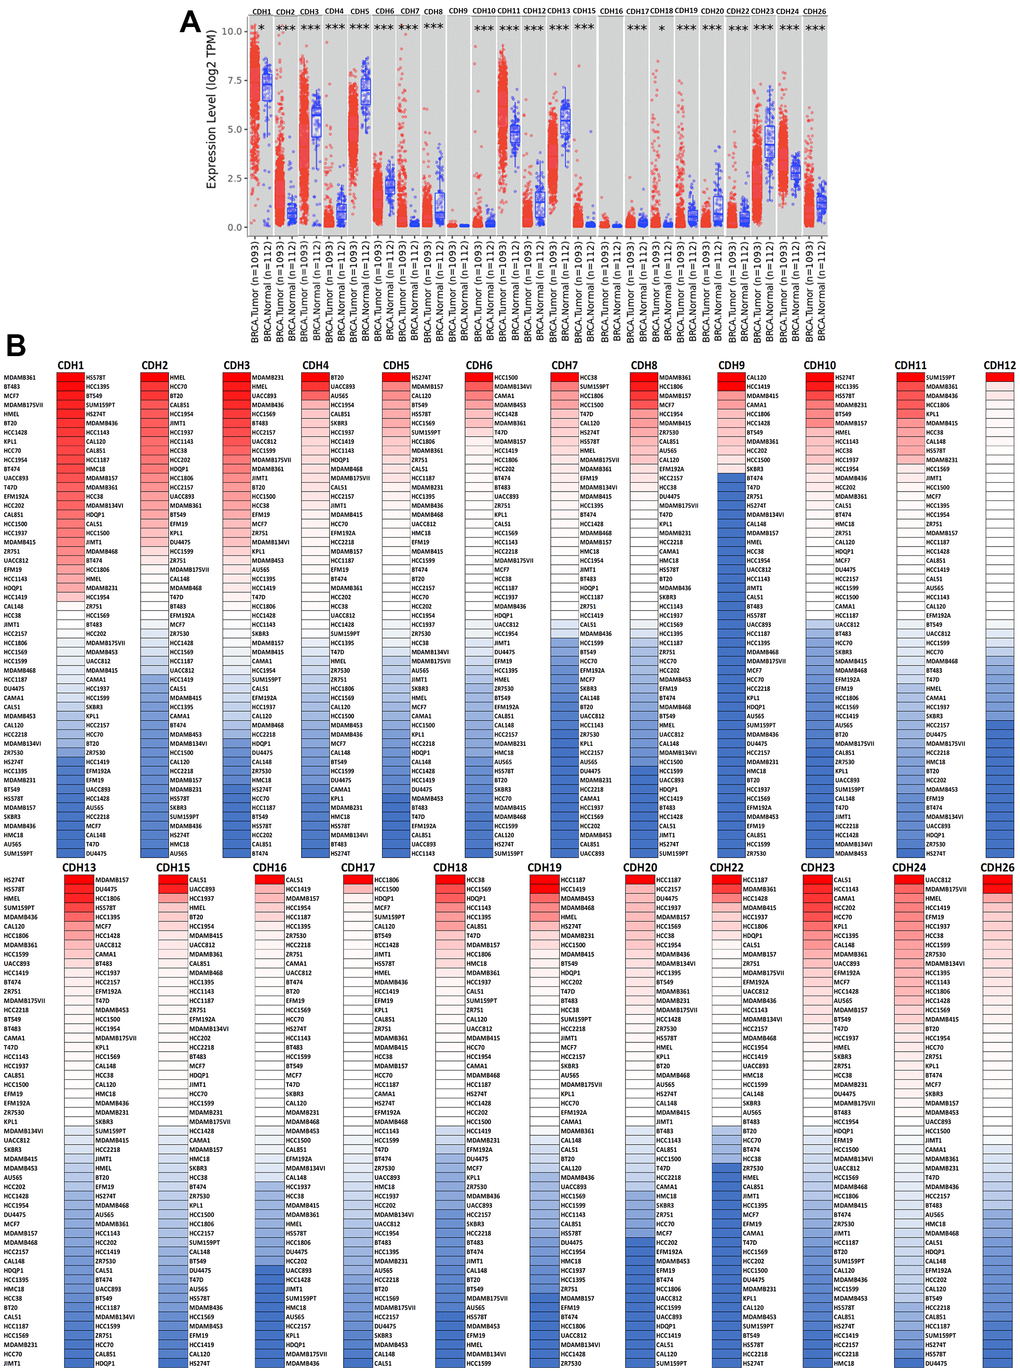 Expression levels of cadherin (CDH) gene family members in breast invasive carcinoma (BRCA). (A) In the TIMER database, a box plot shows transcripts of CDH gene family members in normal and breast cancer tissues. The Wilcoxon test was used to determine statistical significance; * ppB) Expression levels of CDH gene family members in breast cancer cell lines are represented by a heatmap (CCLE). We used data from the CCLE database to generate mRNA expression values, which were then ranked. In CCLE, red denotes overexpression (top column), and blue denotes under-expression (bottom column).